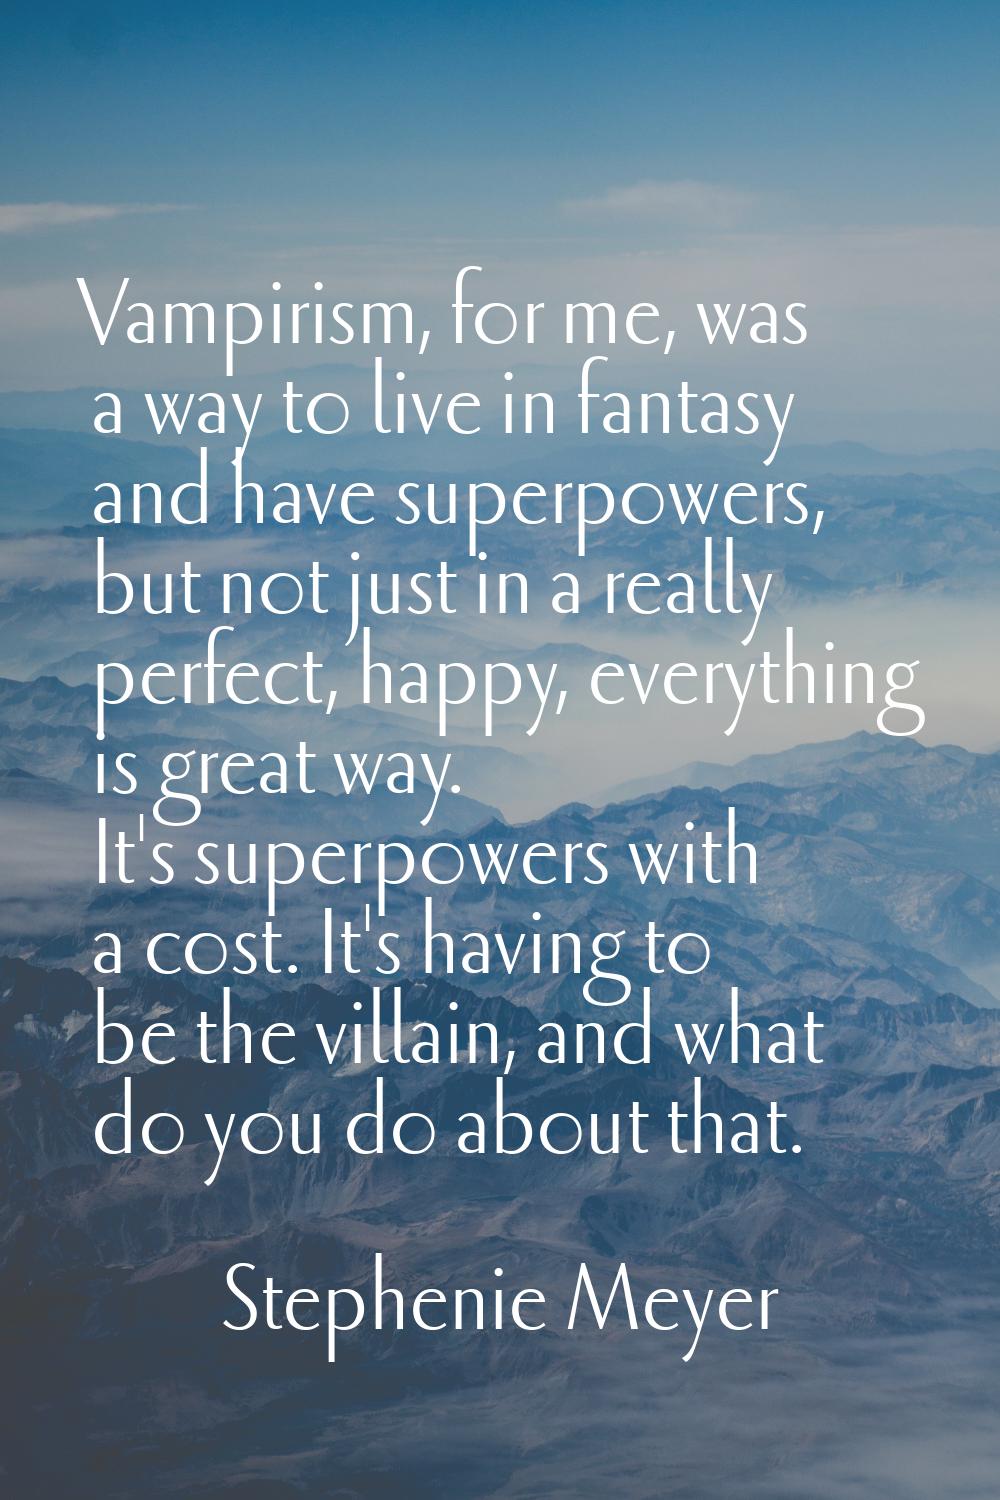 Vampirism, for me, was a way to live in fantasy and have superpowers, but not just in a really perf